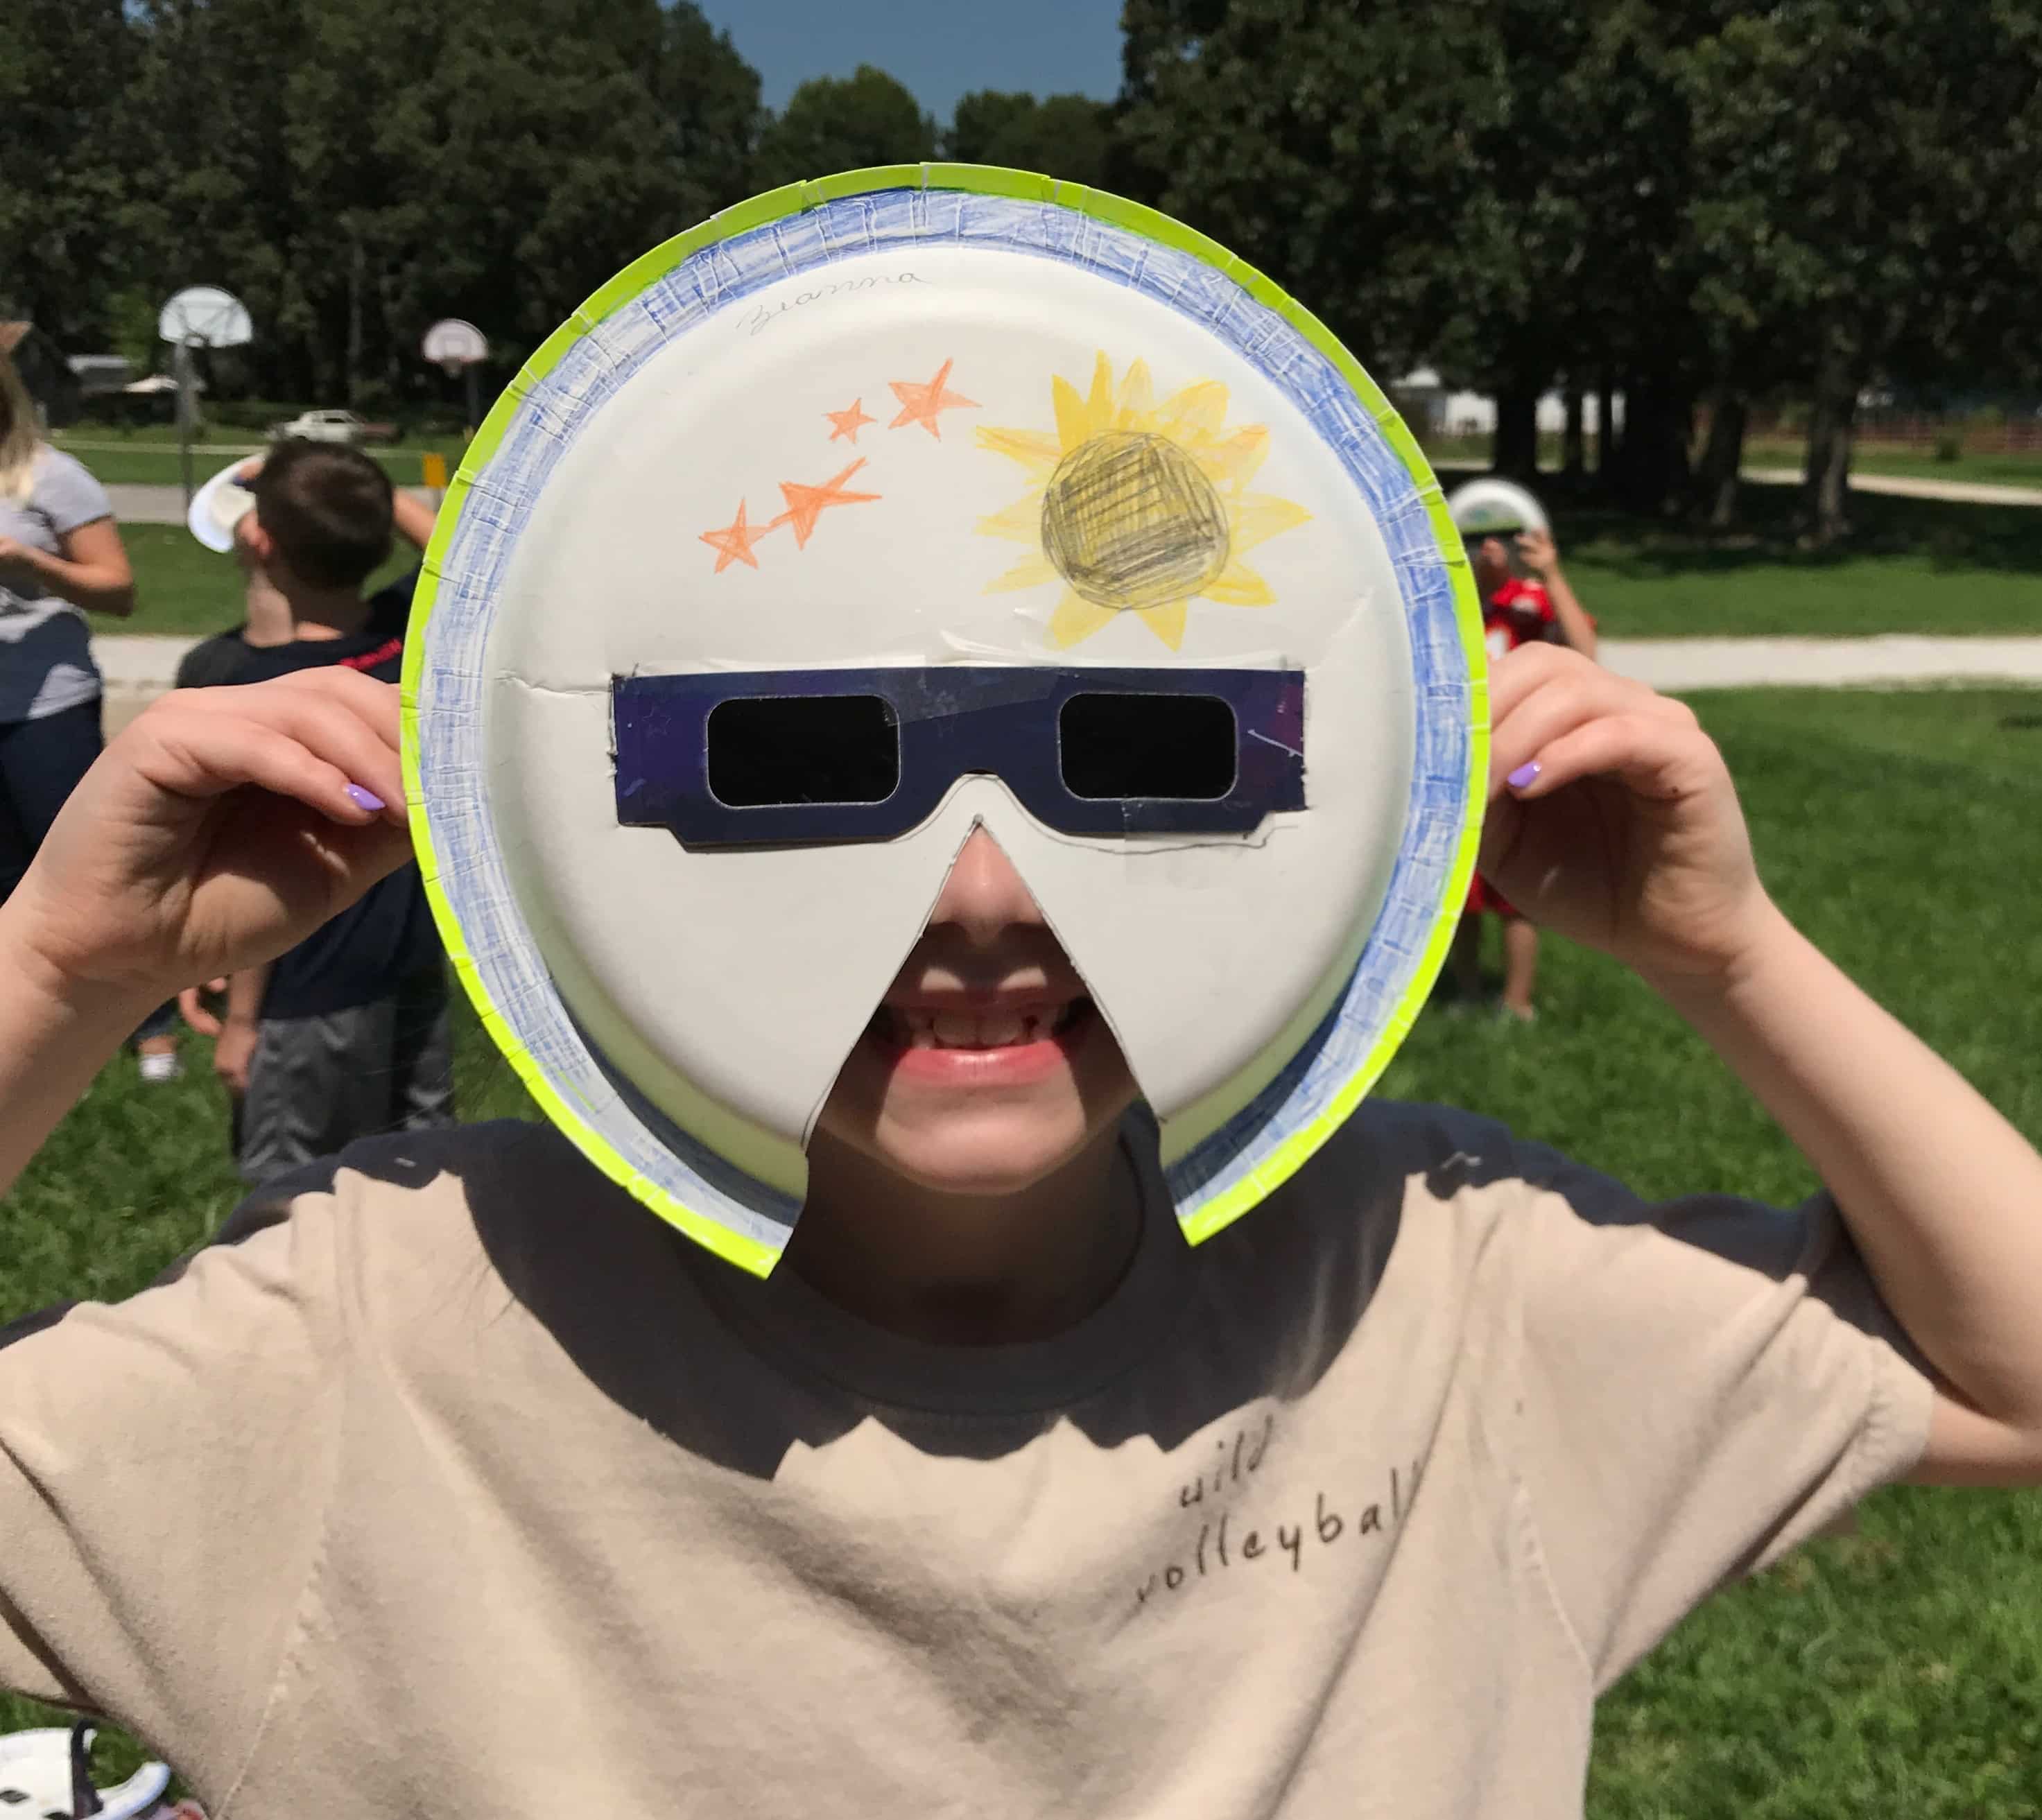 Kid with modified eclipse-watching gear